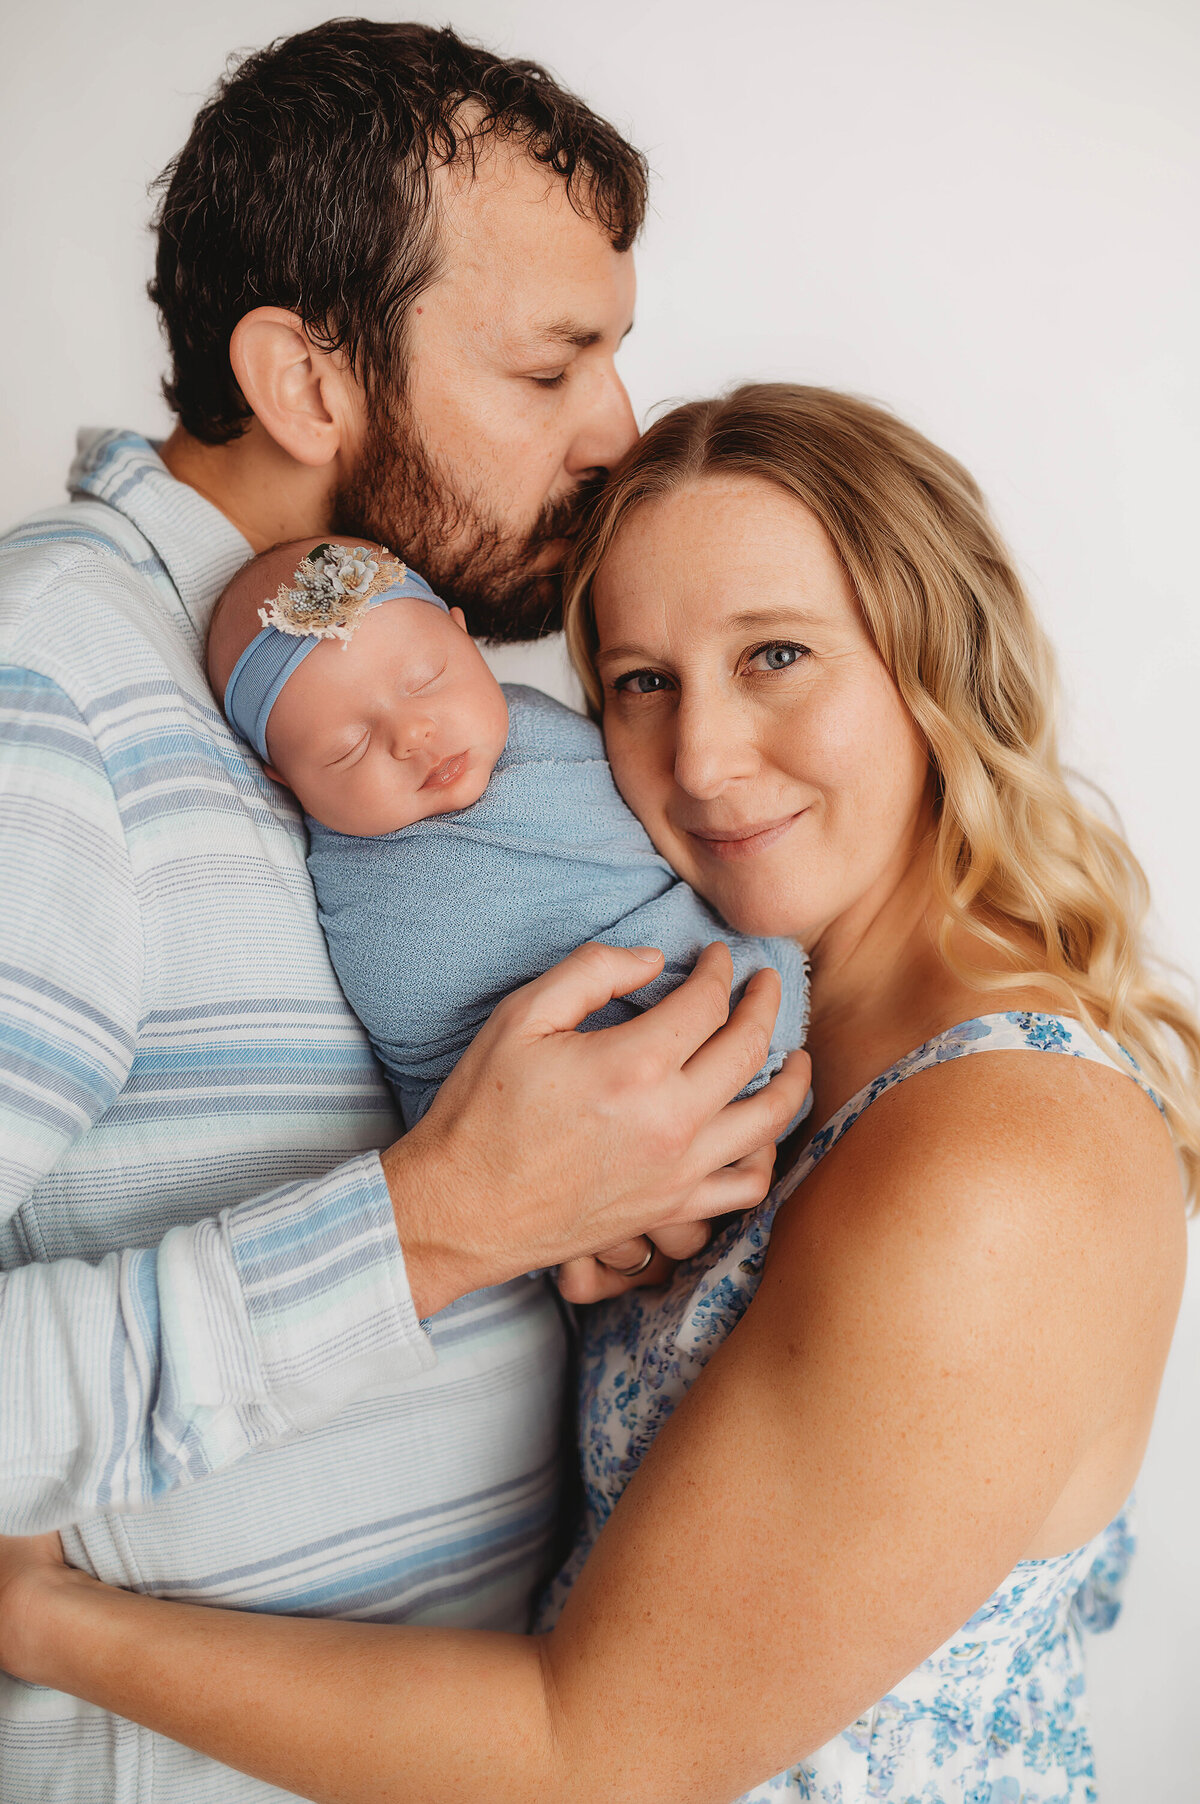 New Parents embrace their Infant during Newborn Photoshoot in Asheville, NC.